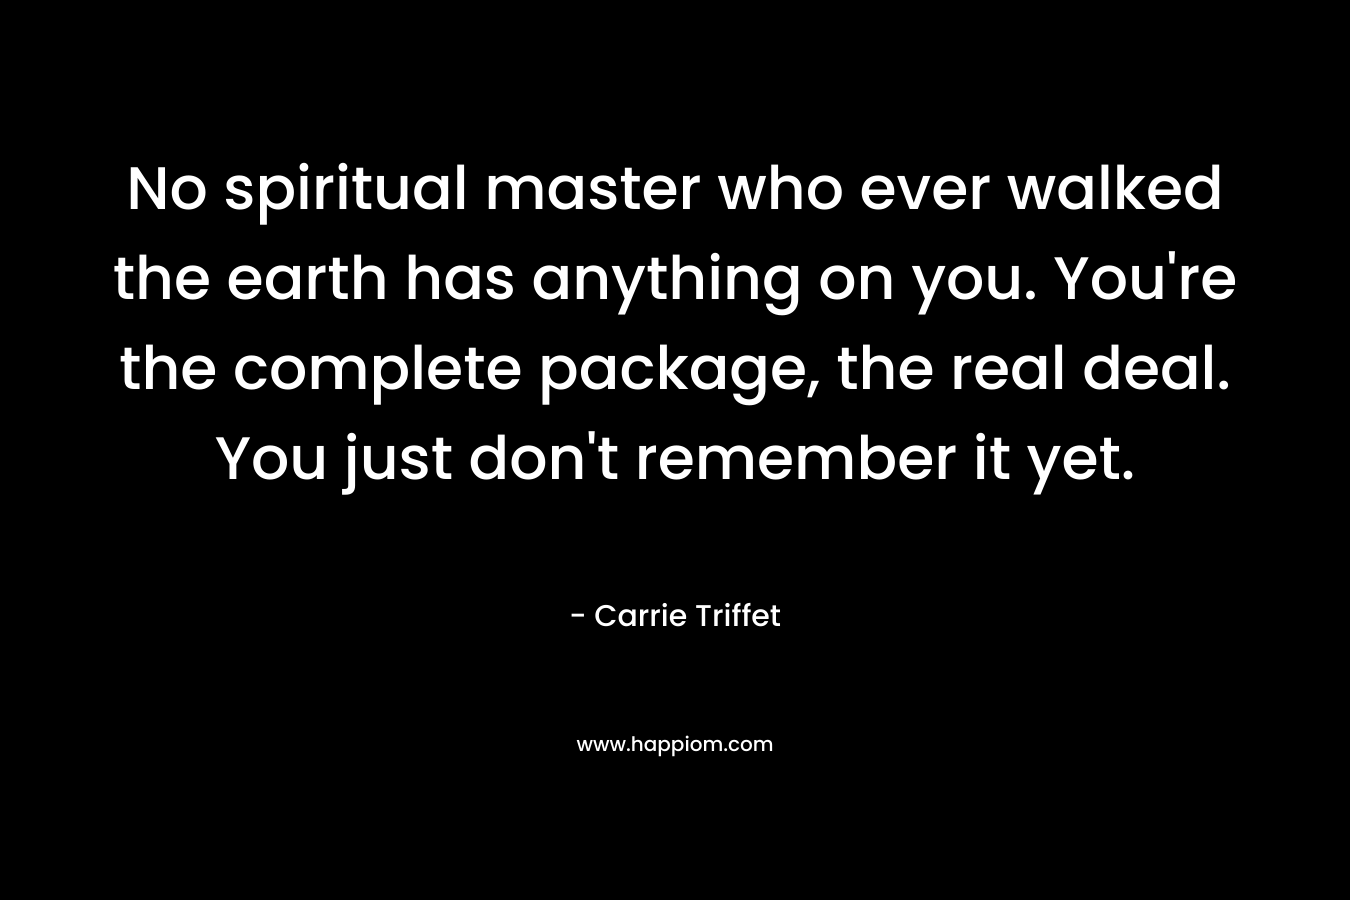 No spiritual master who ever walked the earth has anything on you. You're the complete package, the real deal. You just don't remember it yet.